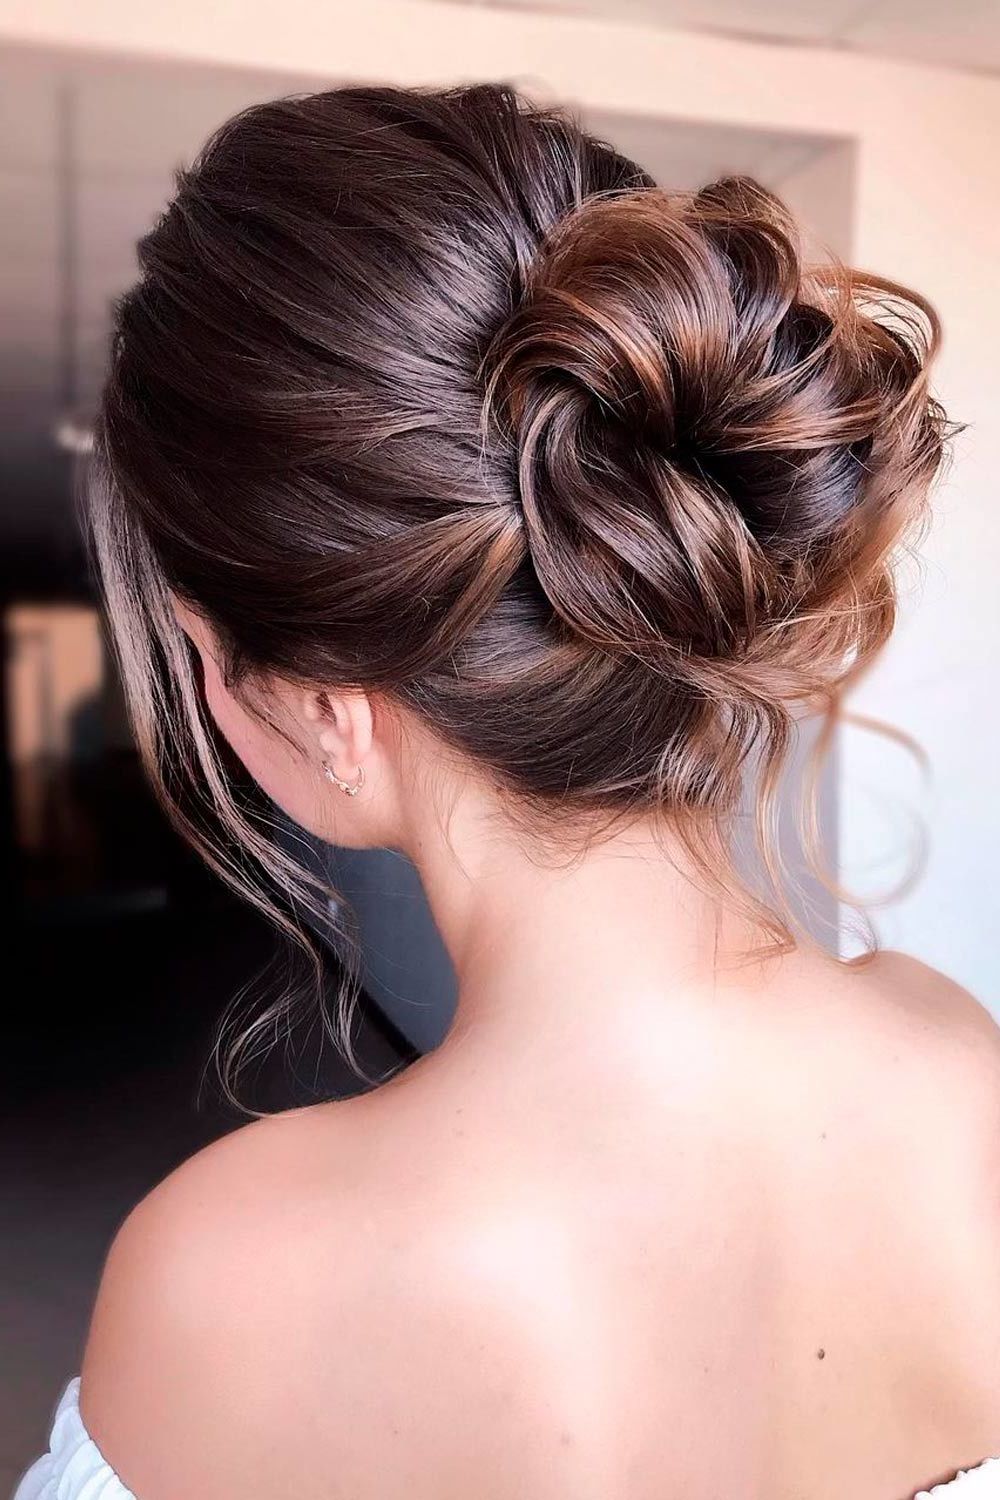 Lovehairstyles (View 19 of 20)